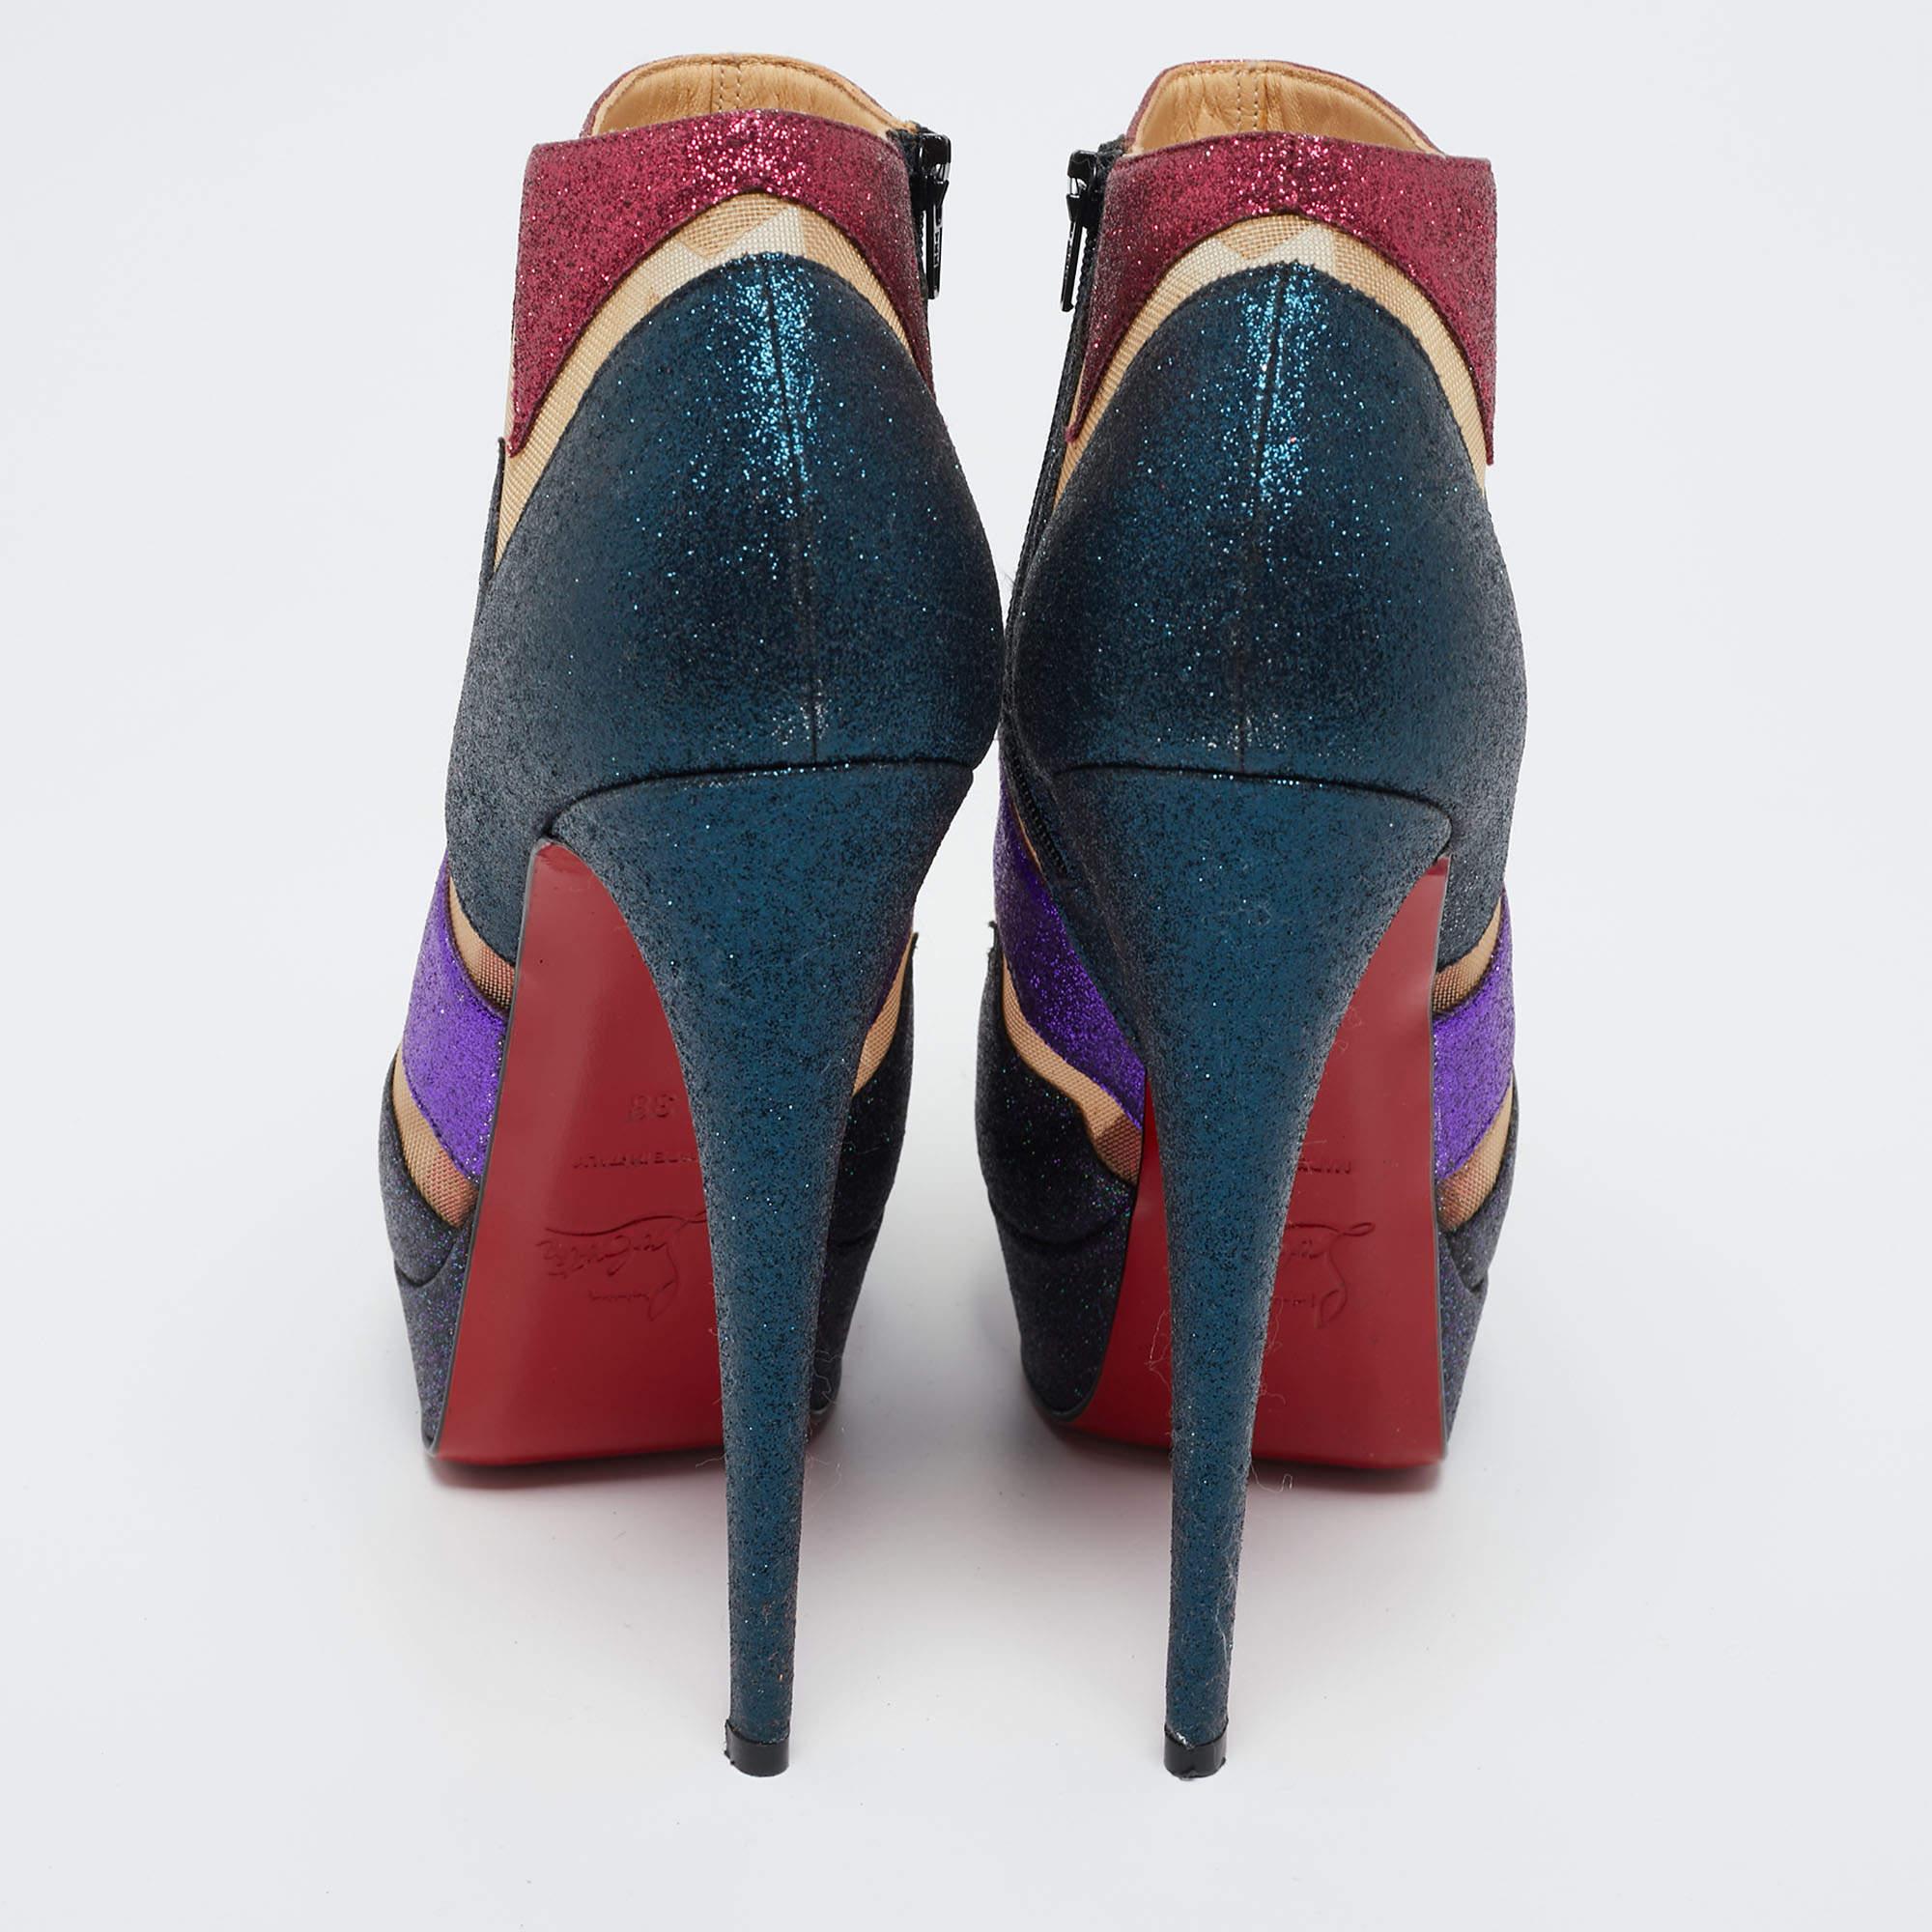 Christian Louboutin Glitter and Mesh Ziggy Peep-Toe Ankle Booties Size 38 In Good Condition For Sale In Dubai, Al Qouz 2